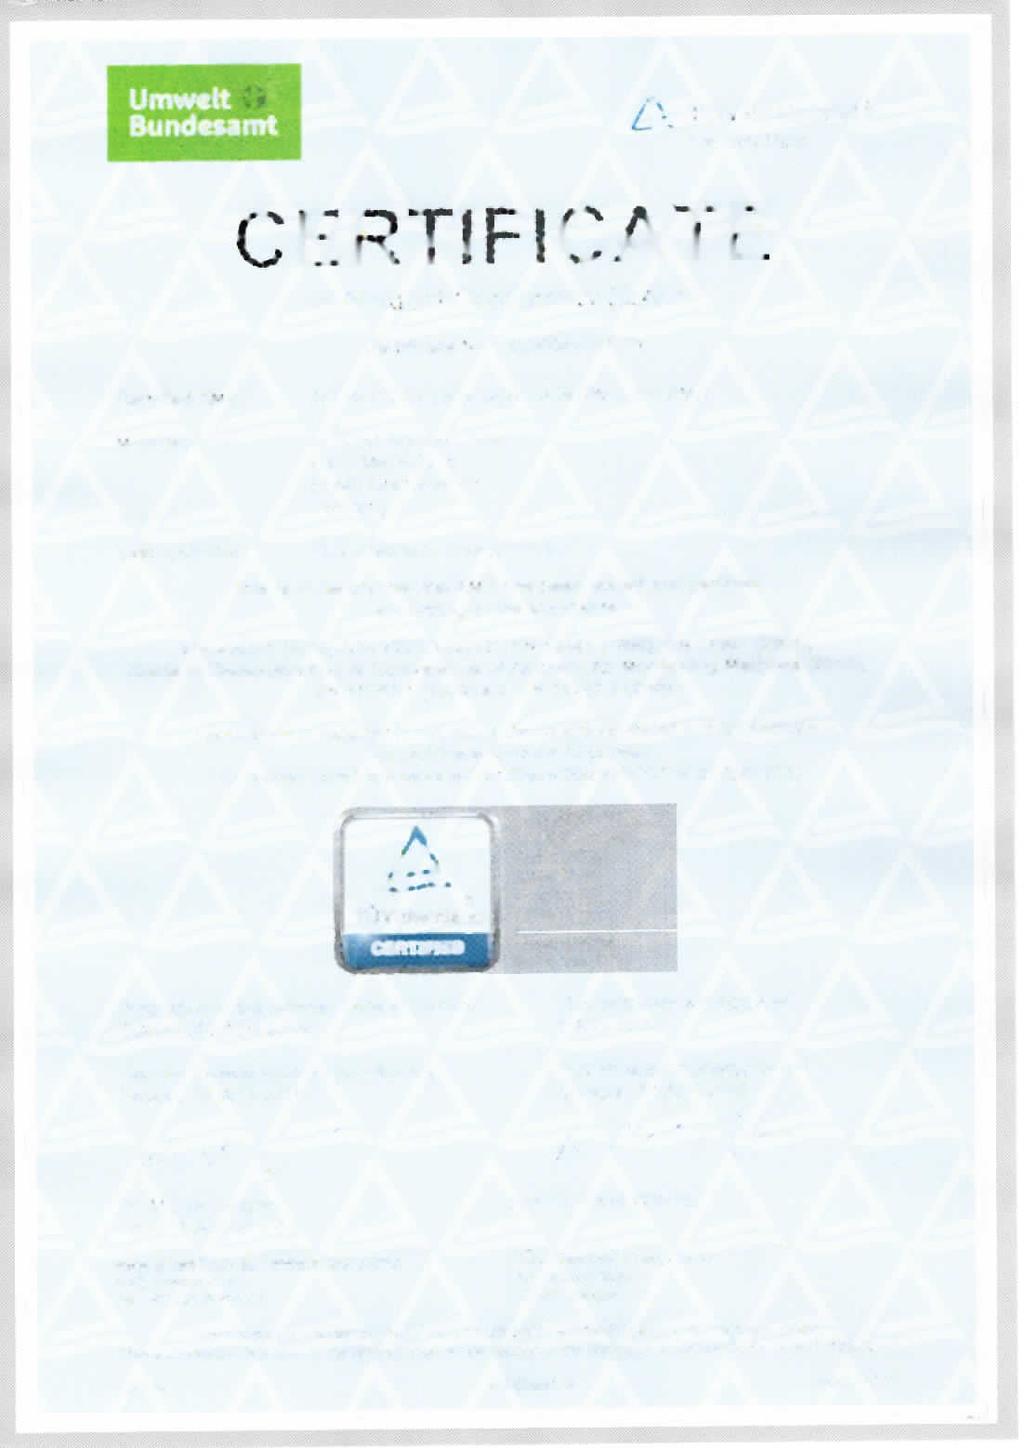 ATÜVRheinland Precisely Right. CERTIFICATE of Product Conformity (QAL1 ) Certificate No.: 0000043107_01 Certified AMS: Manufacturer: Test lnstitute: APDA-372 for particulate matter PMio and PM2.